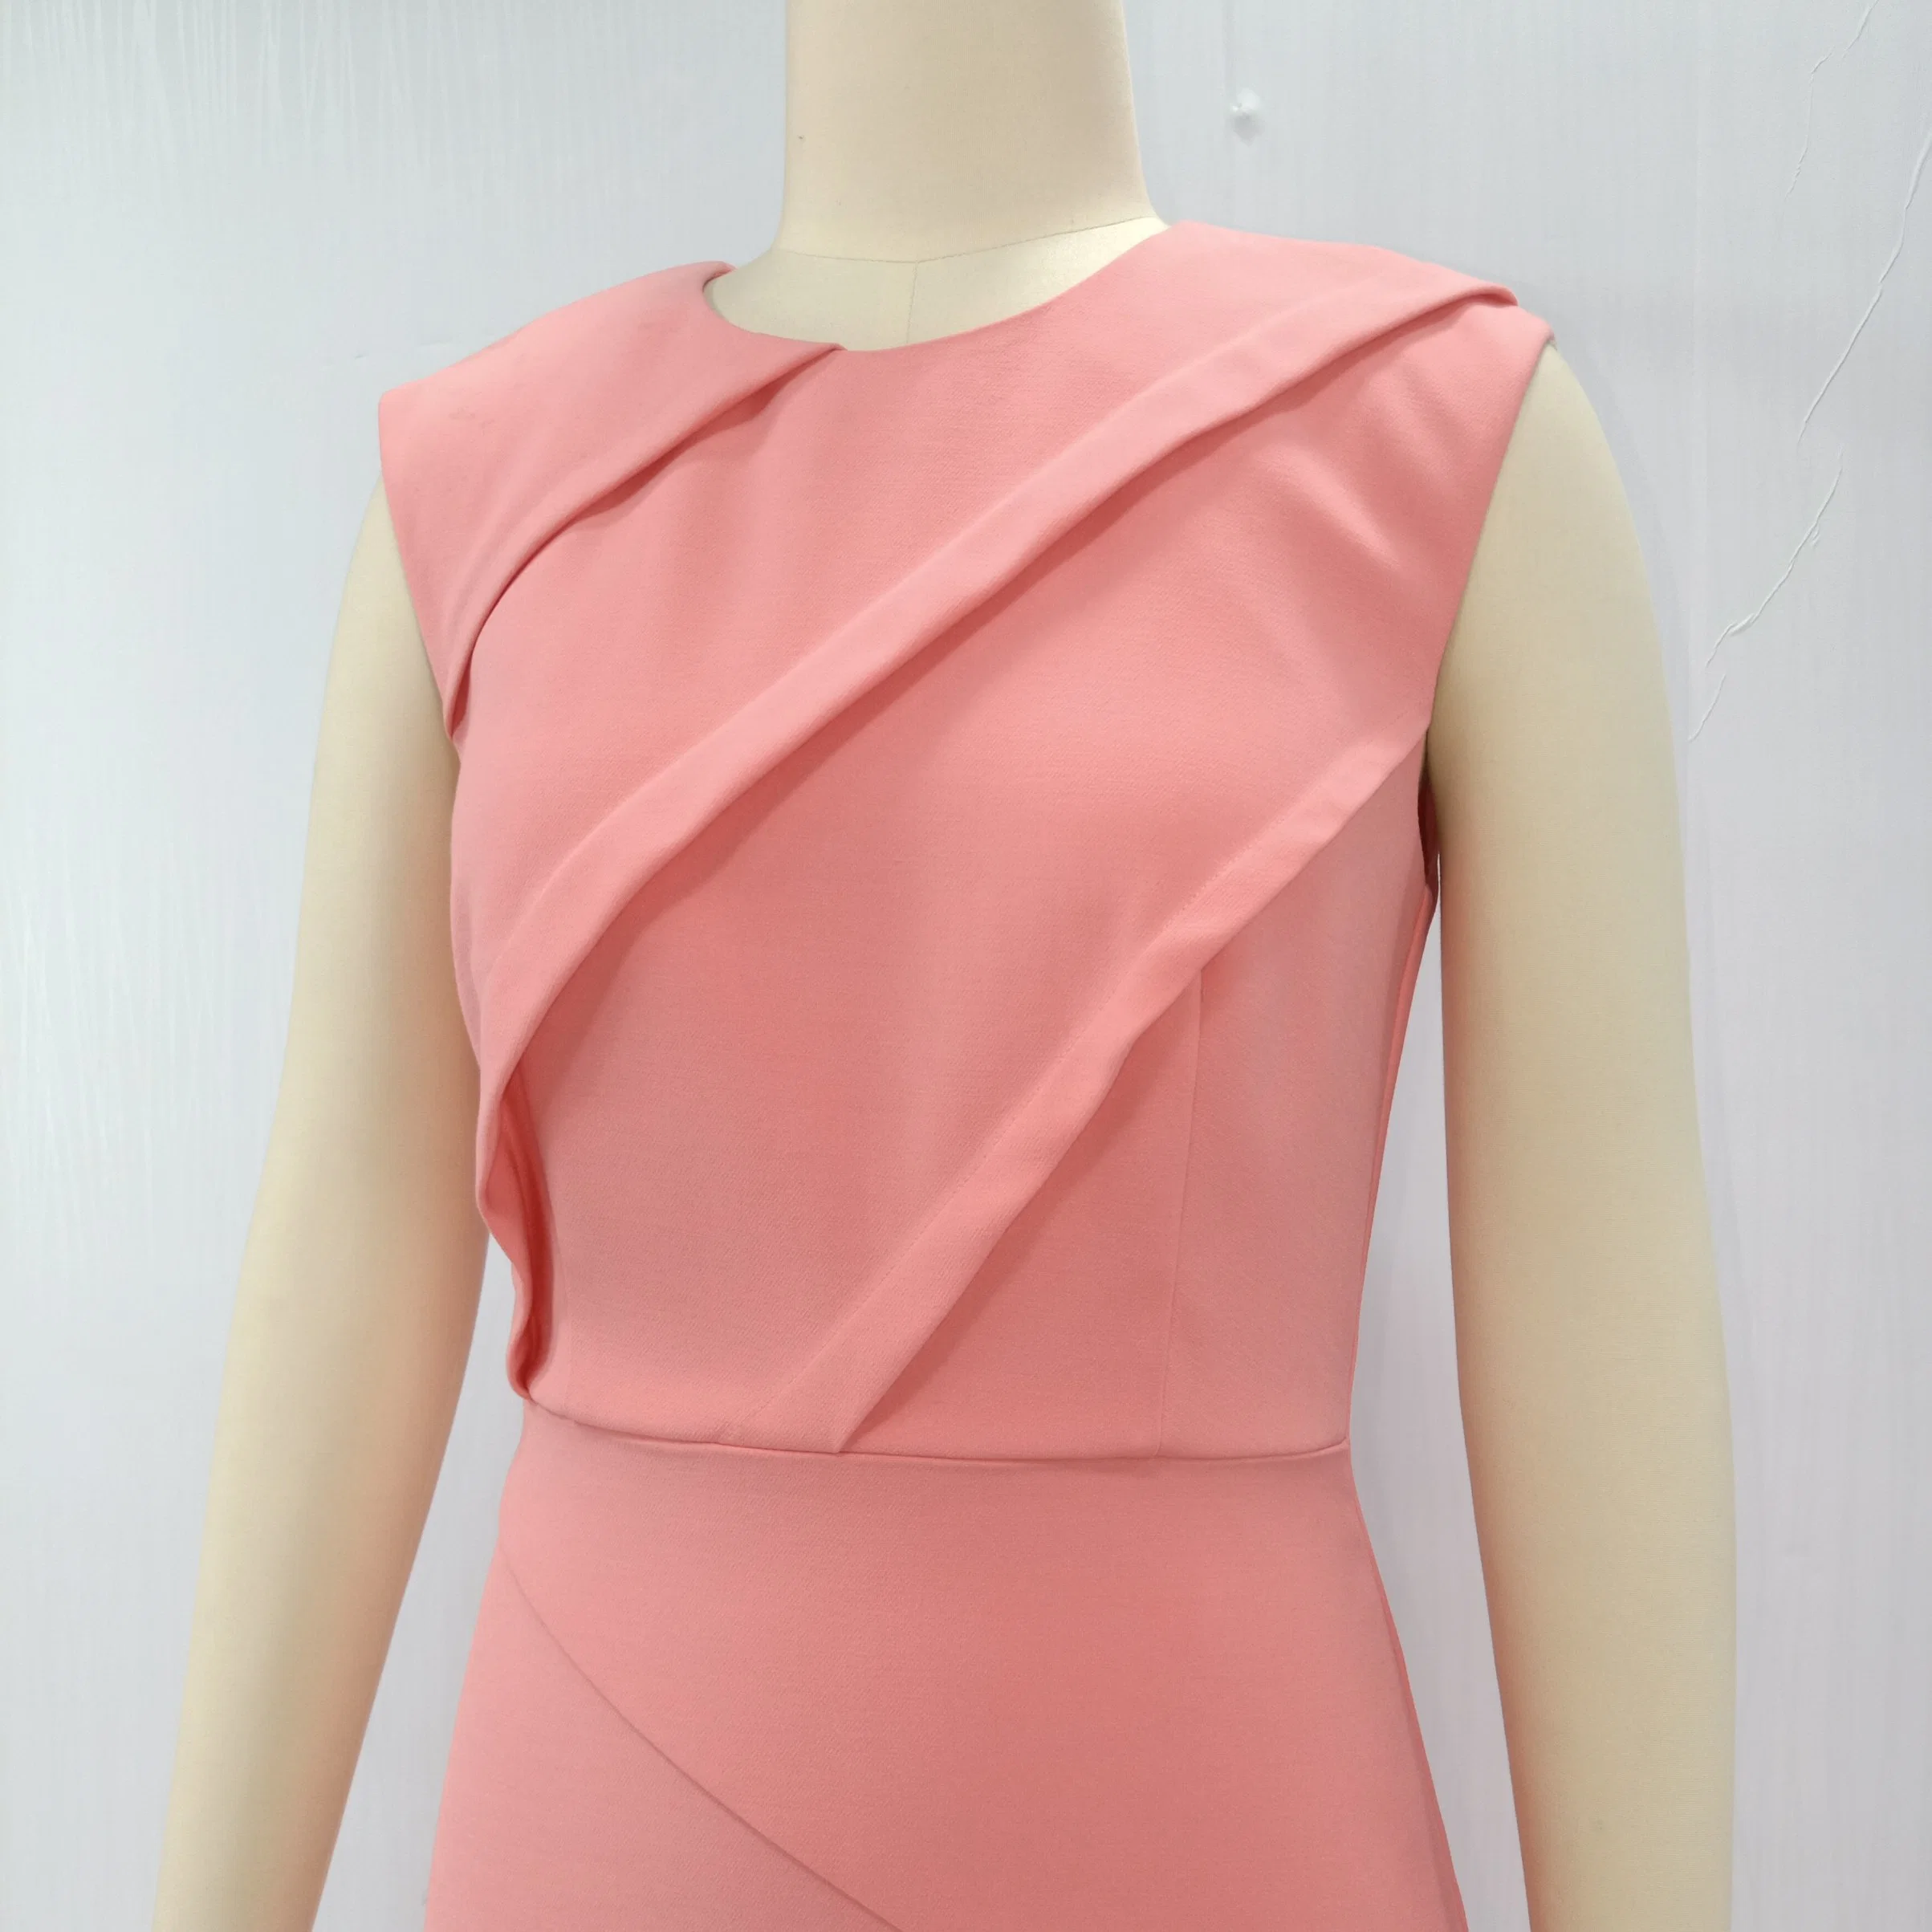 High Quality Fashion Elegant Pink Sleeveless Summer Dress Women Clothes for Lady